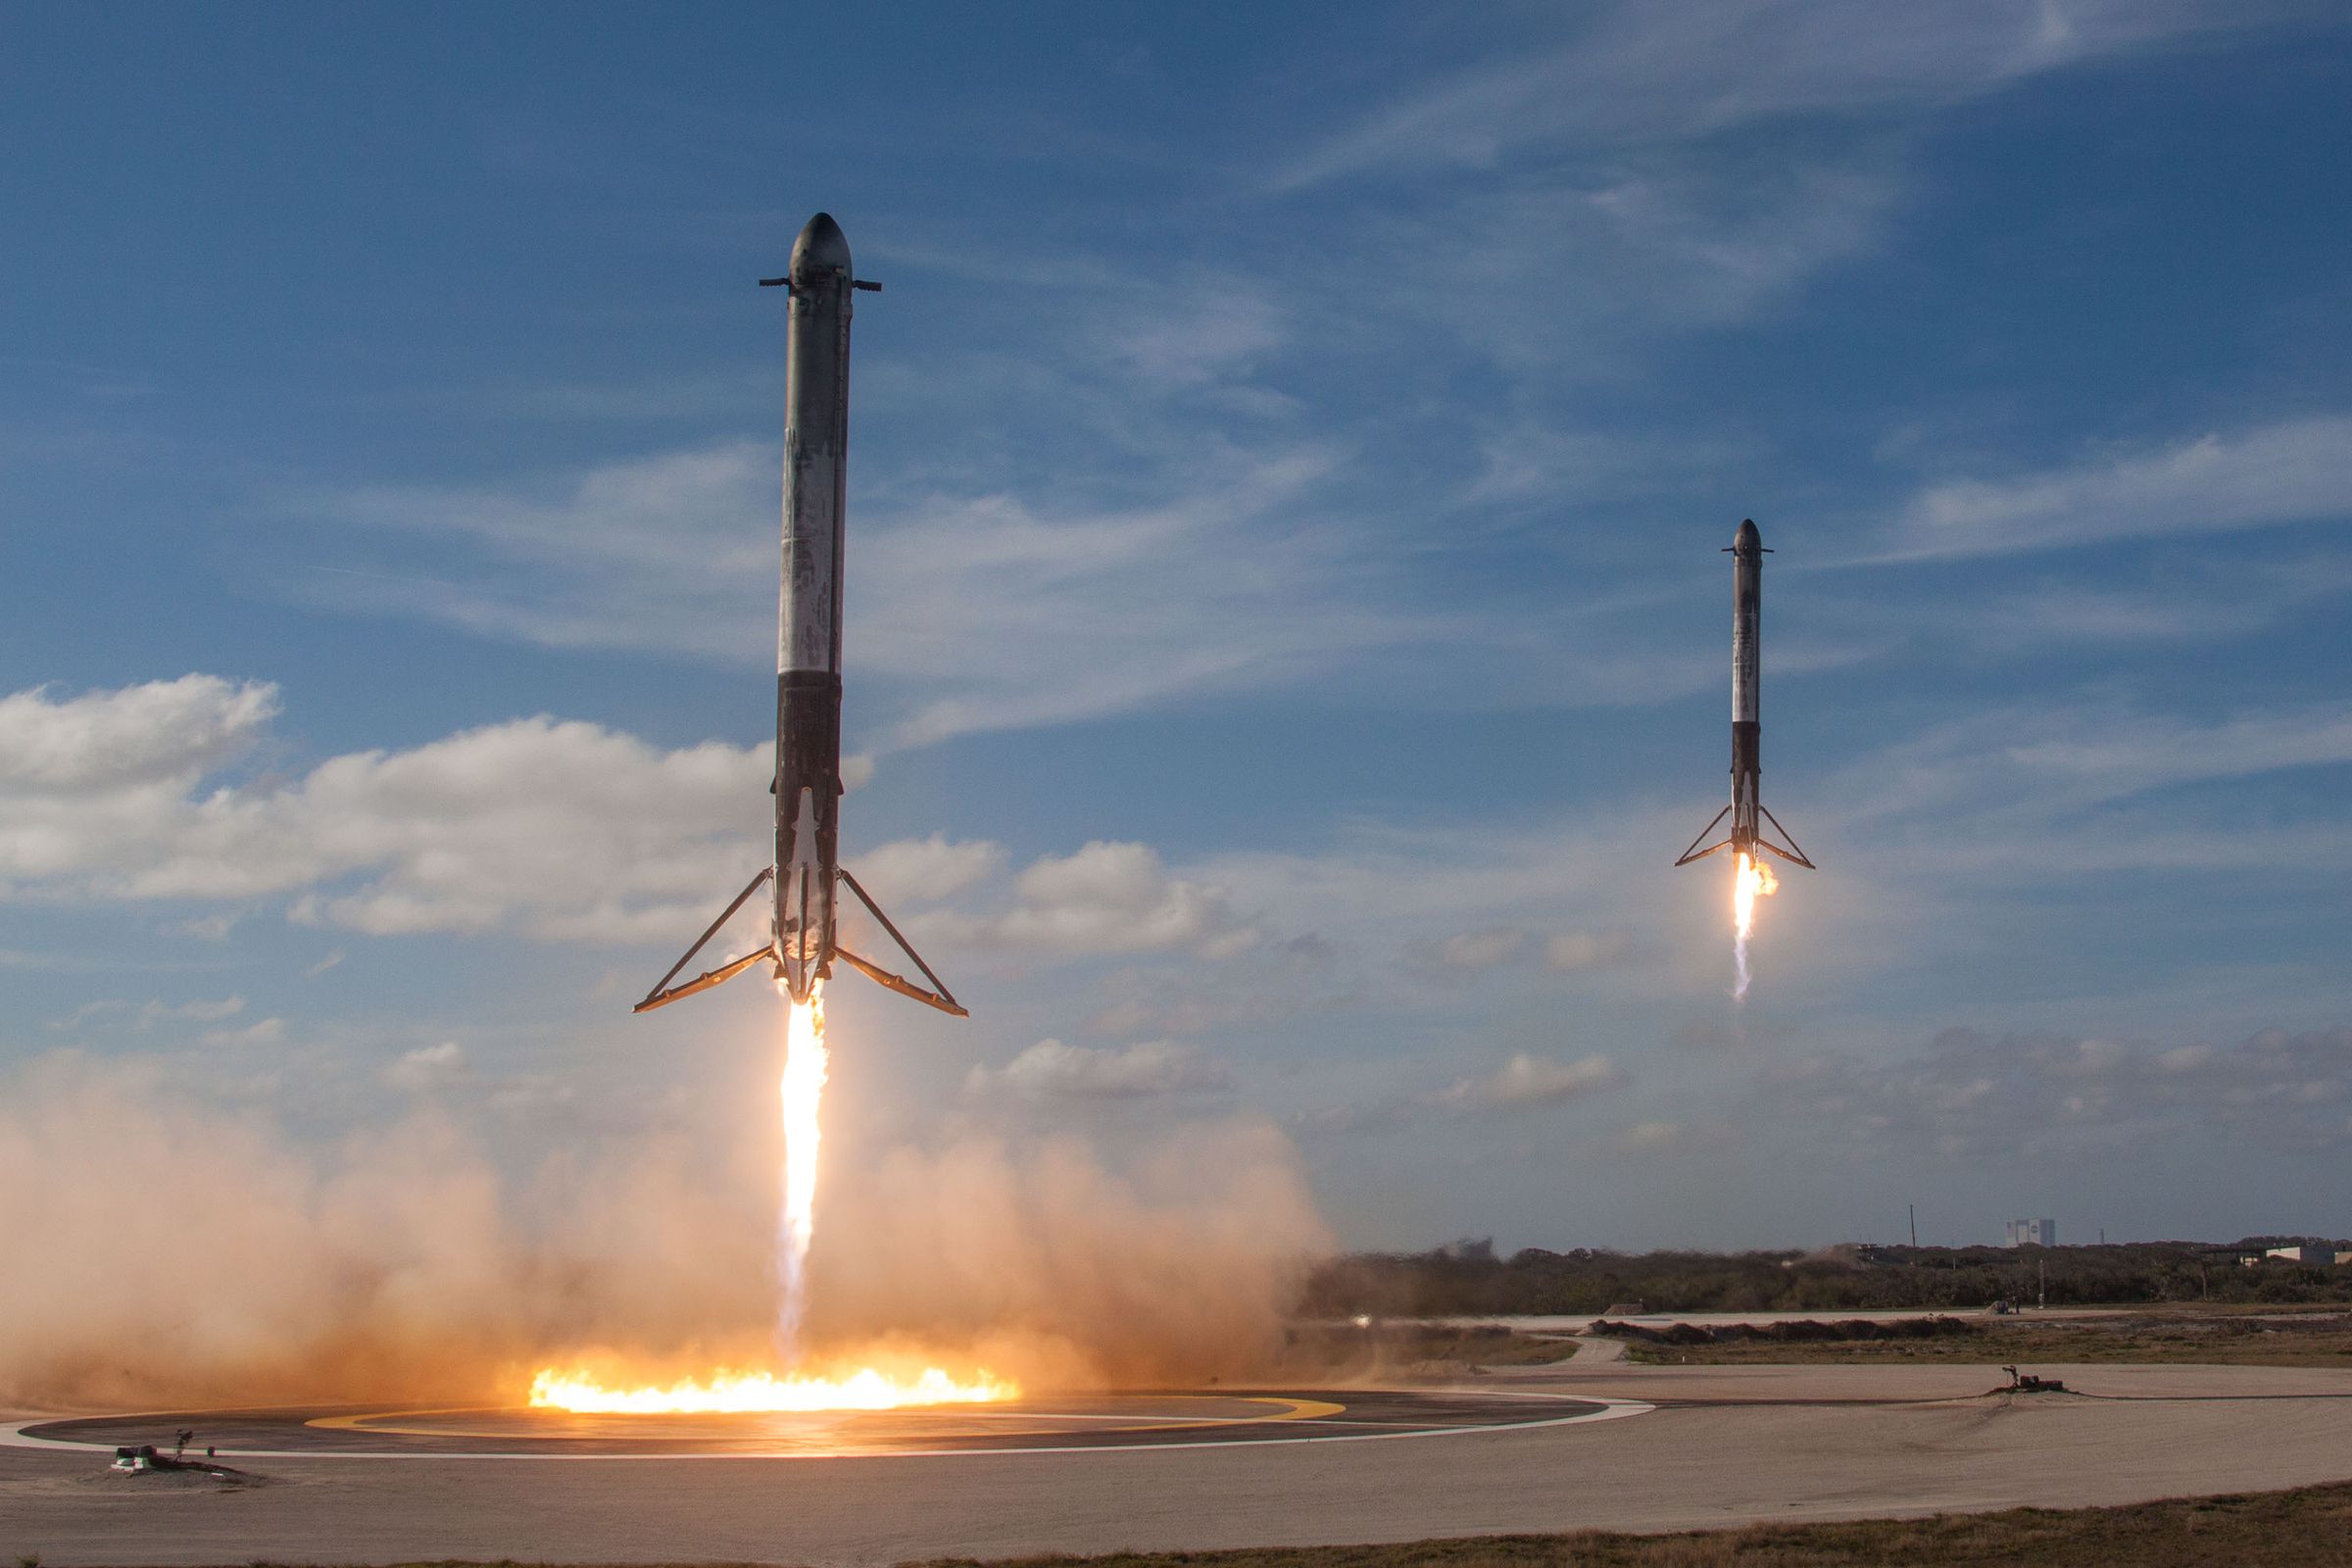 SpaceX successfully landed two rocket boosters on land in Florida following the launch of its Falcon Heavy vehicle in February